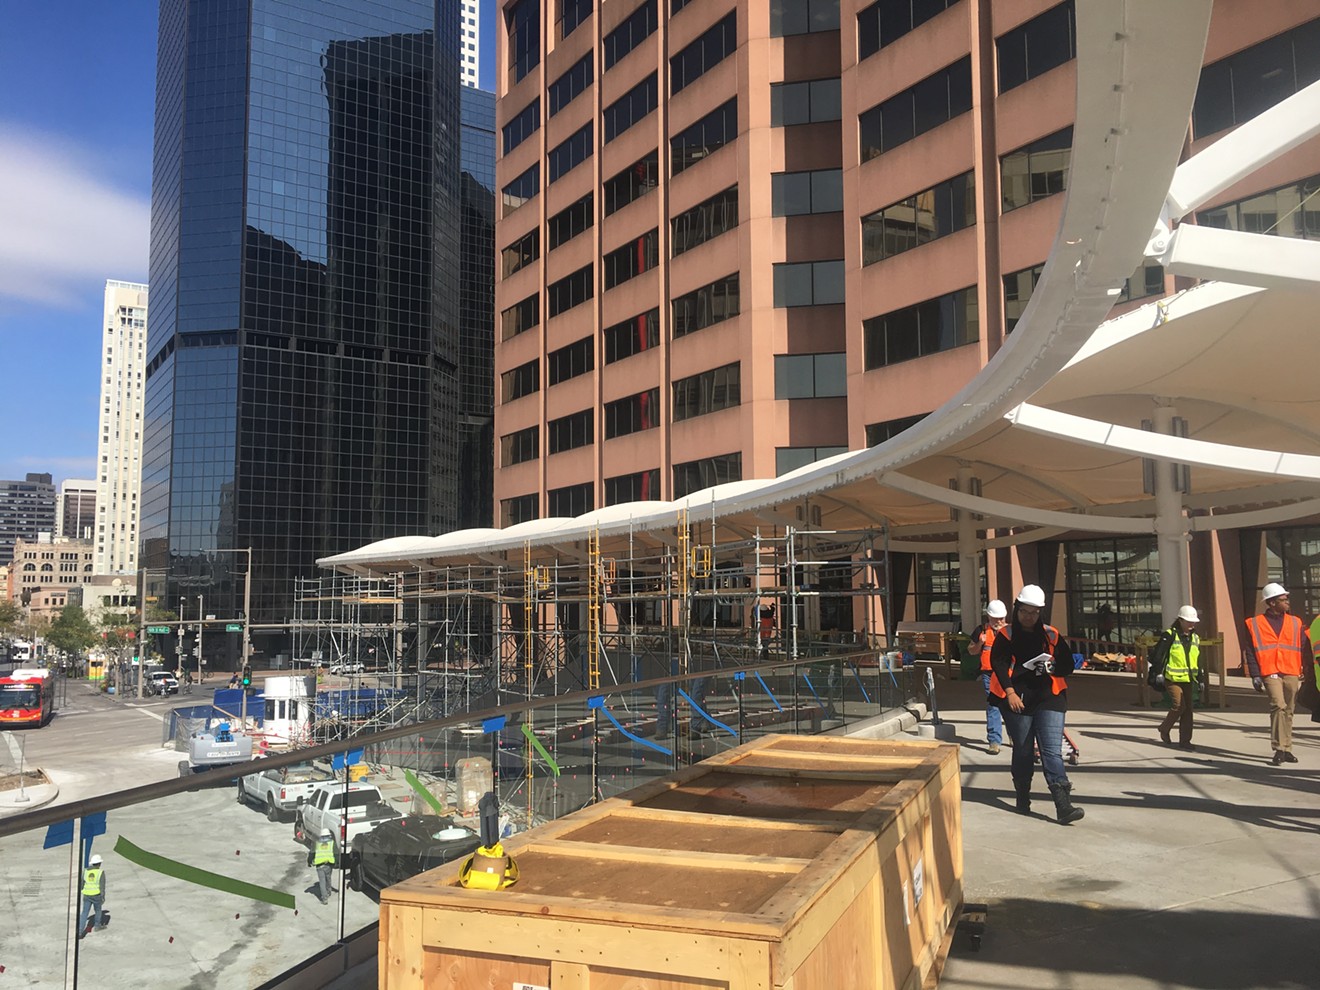 The new Civic Center Station is slated to open in December.